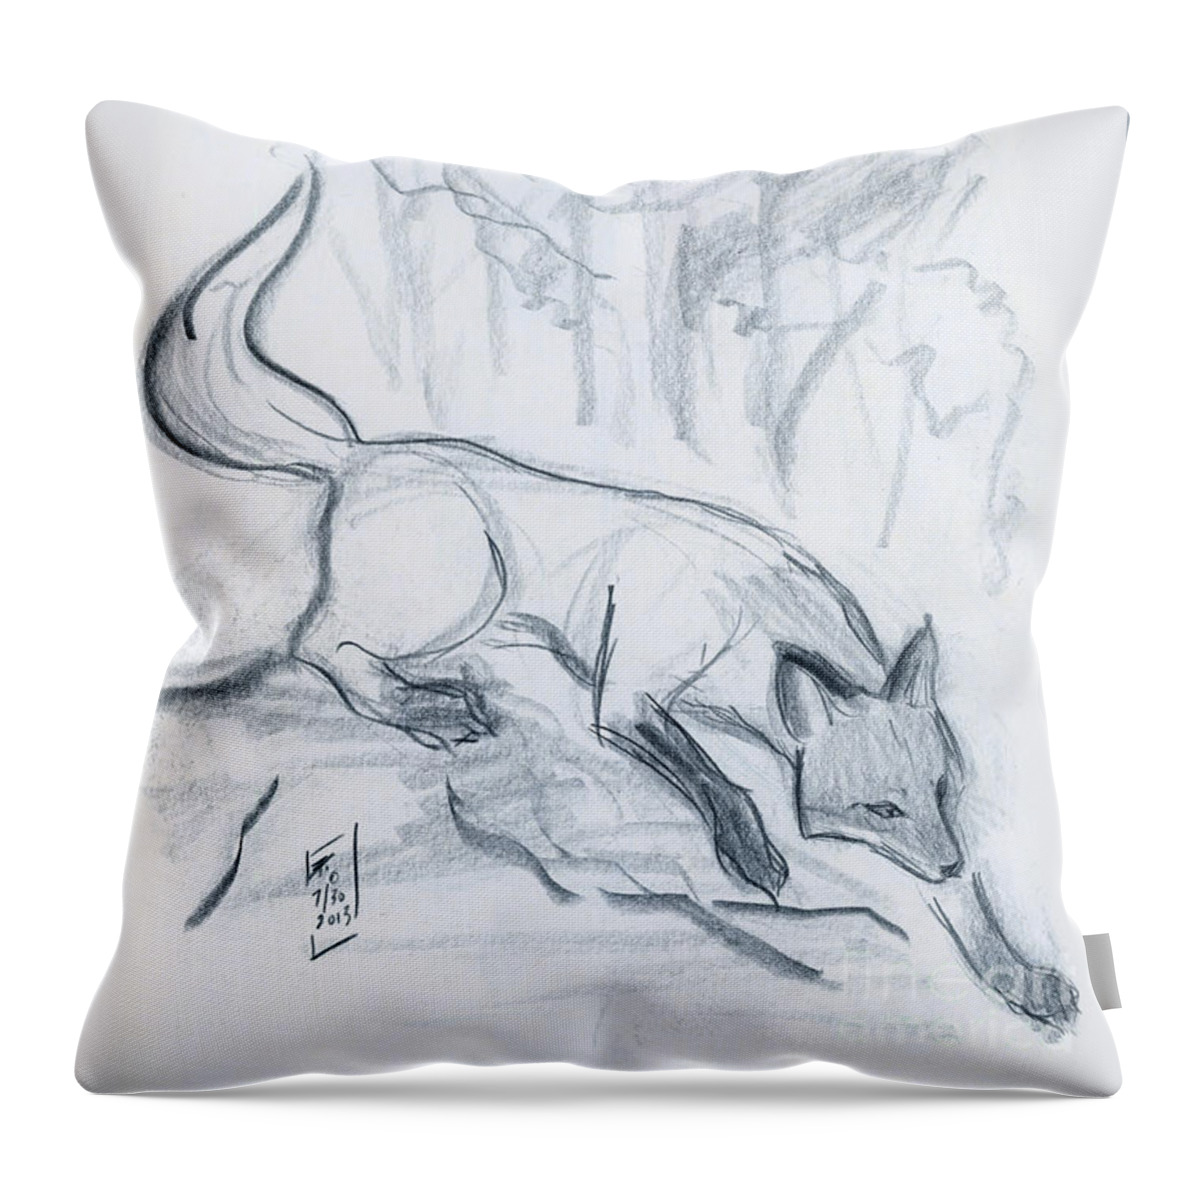 Okami Throw Pillow featuring the drawing Japanese Fox Sketch by Brandy Woods